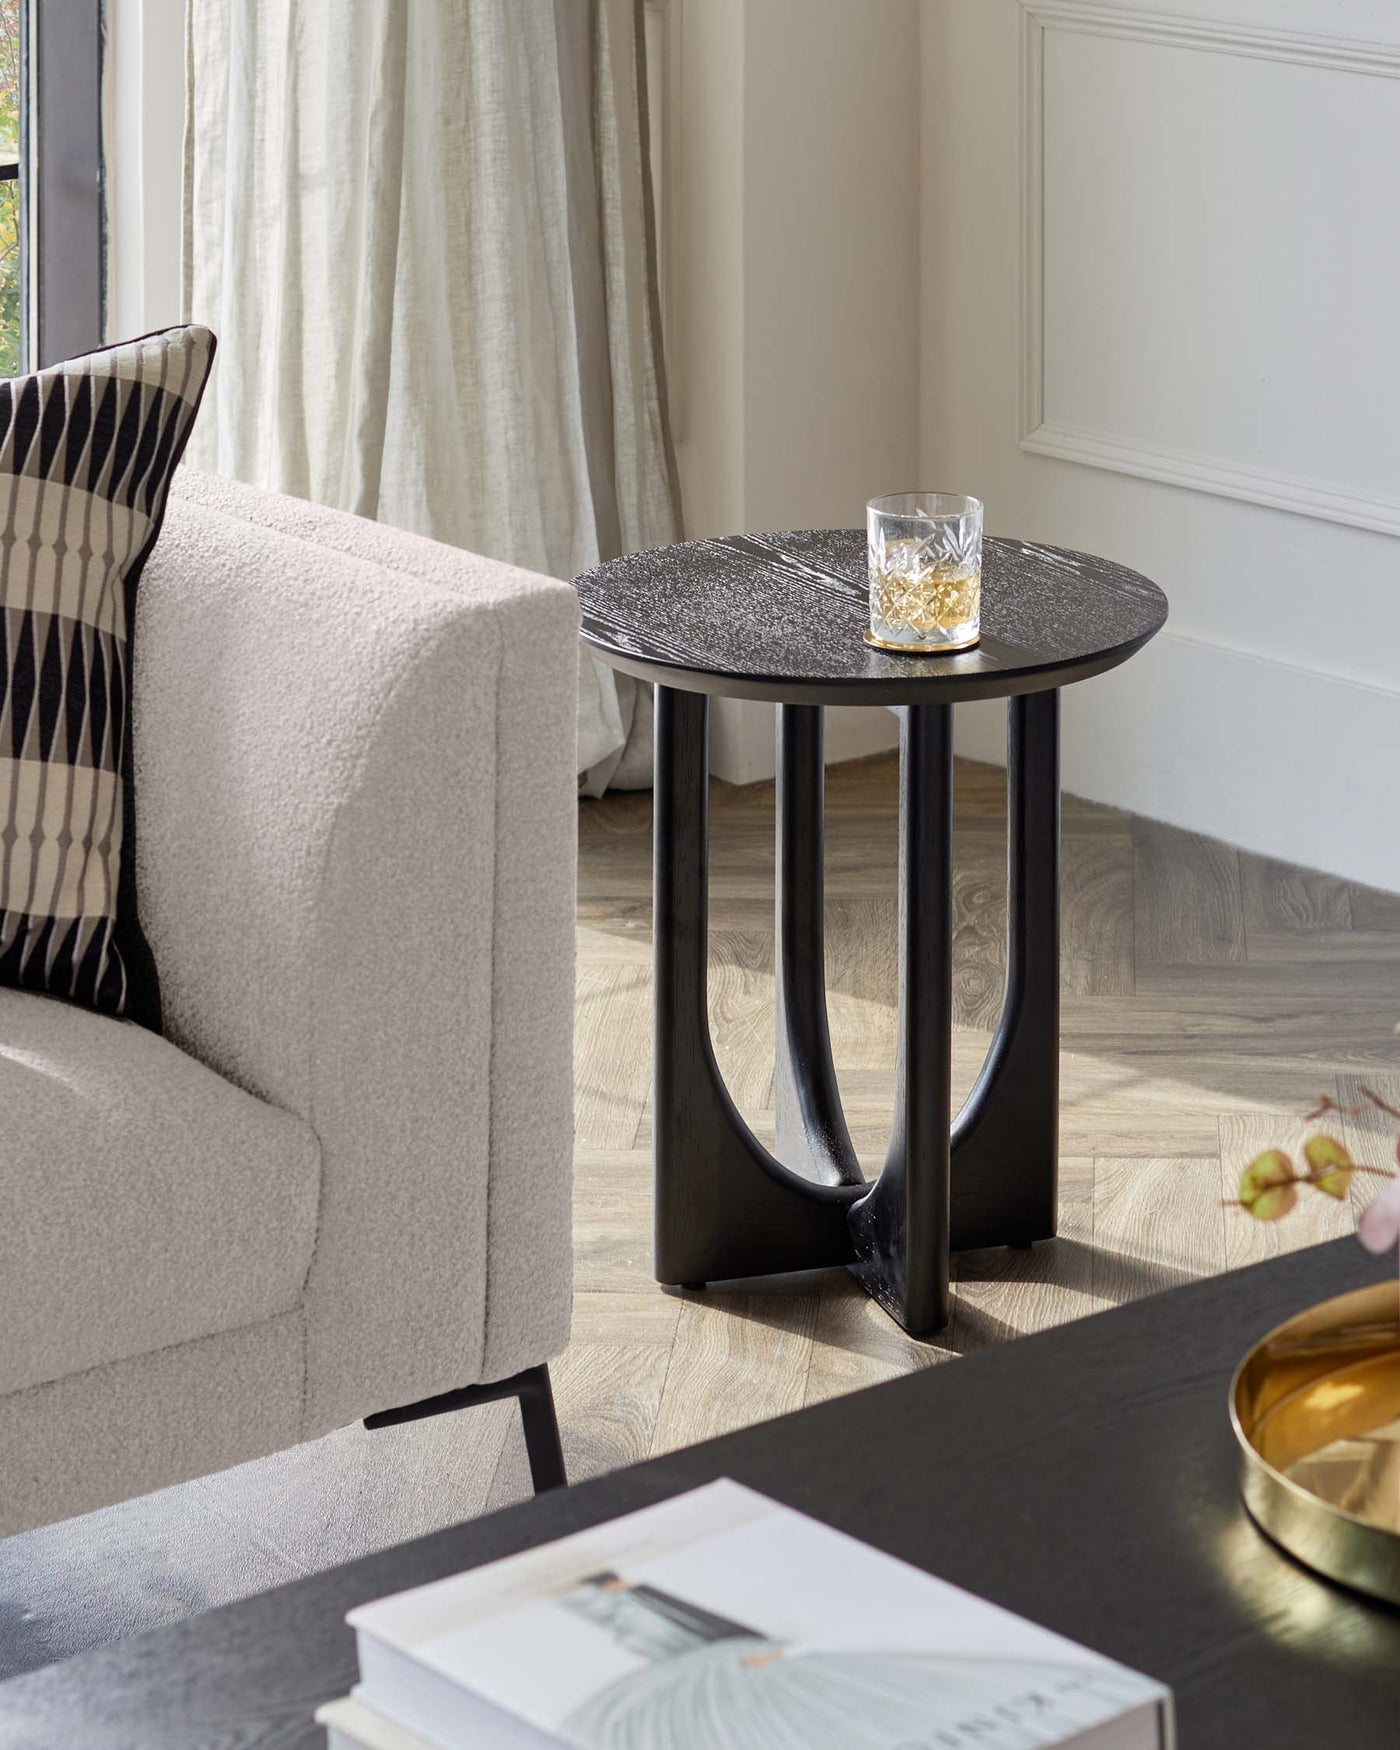 A contemporary round side table with a textured black tabletop and curved black metal legs. It is accessorized with a clear glass containing a beverage.